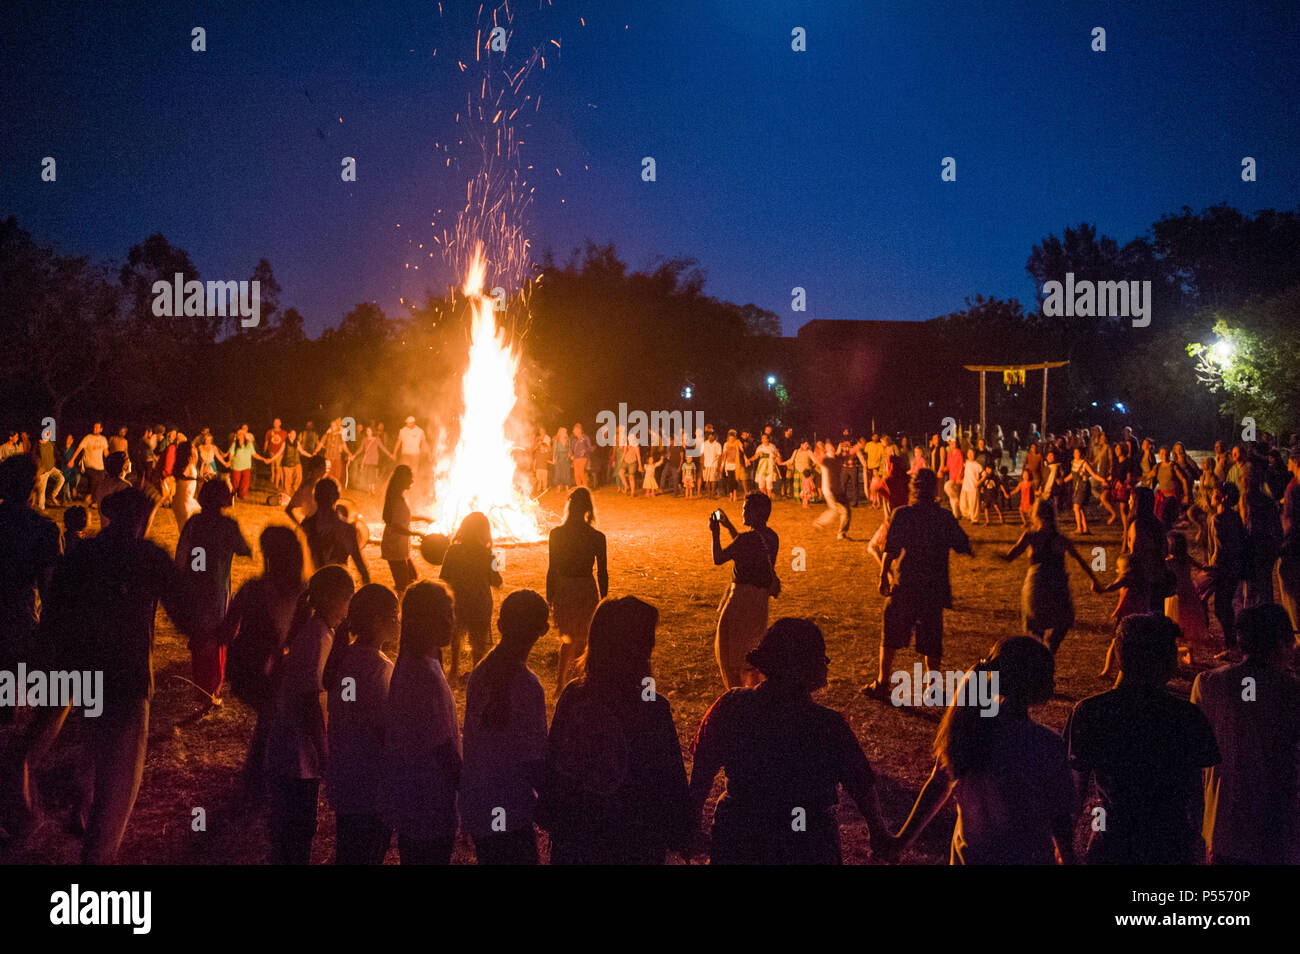 AUROVILLE, INDIA - 2 March 2018: A celebration to mark the first full moon of the lunar calendar. Stock Photo